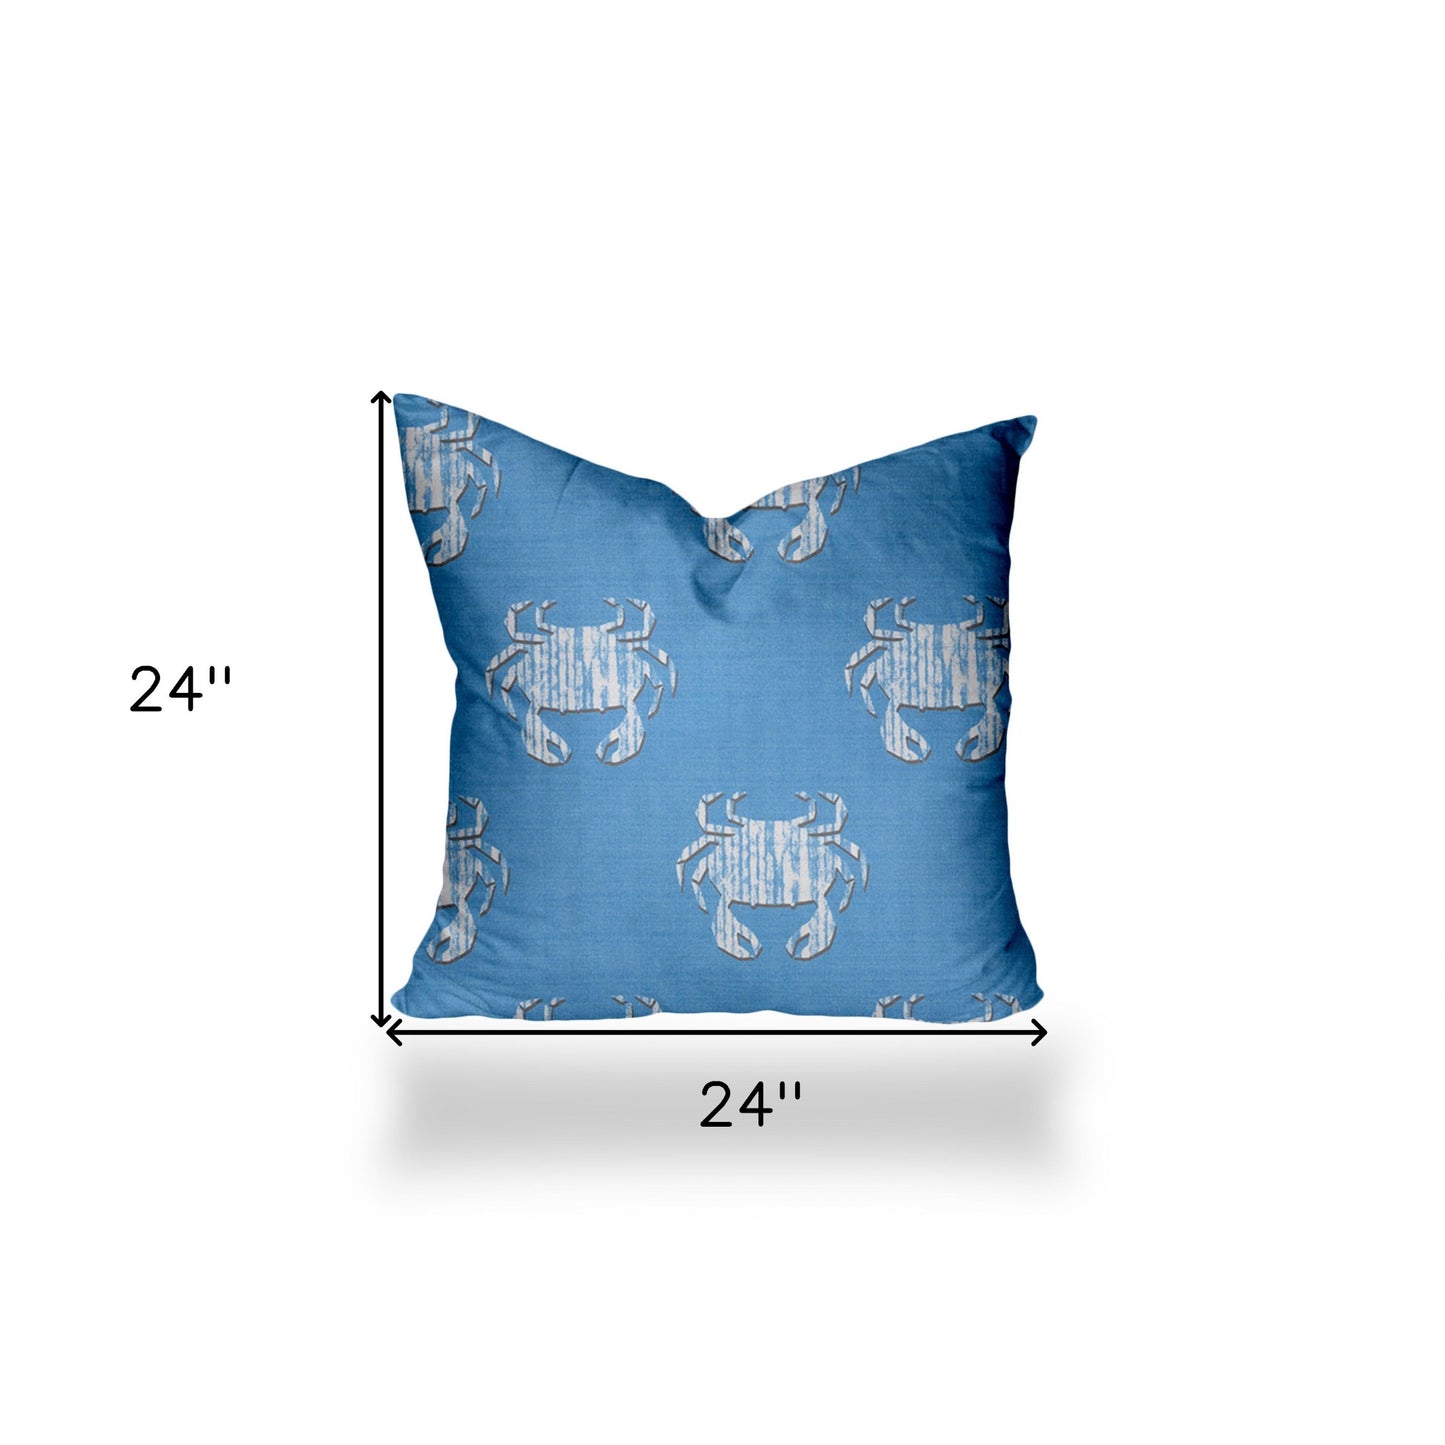 24" X 24" Blue And White Crab Enveloped Coastal Throw Indoor Outdoor Pillow